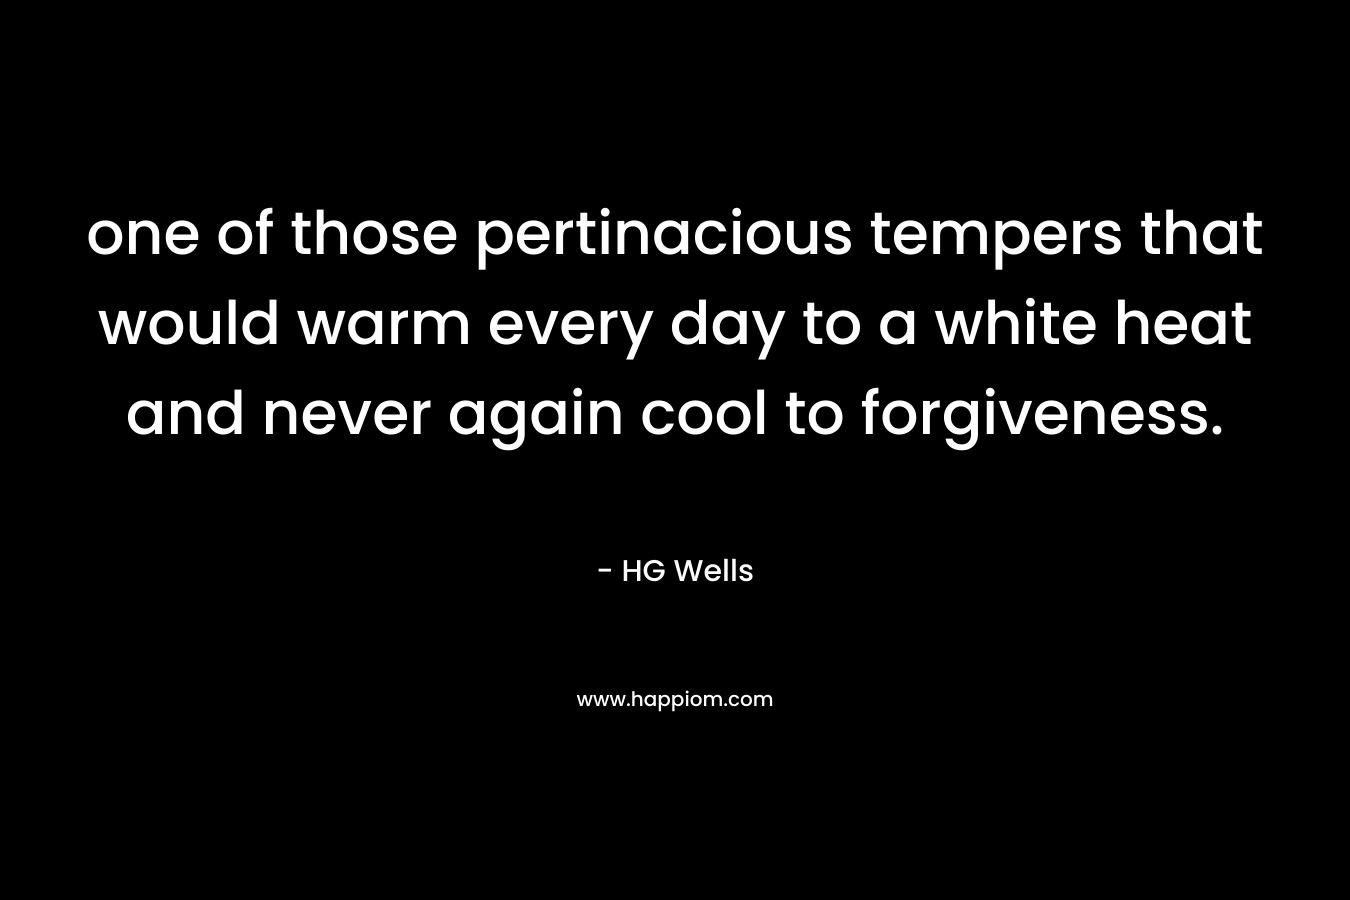 one of those pertinacious tempers that would warm every day to a white heat and never again cool to forgiveness.